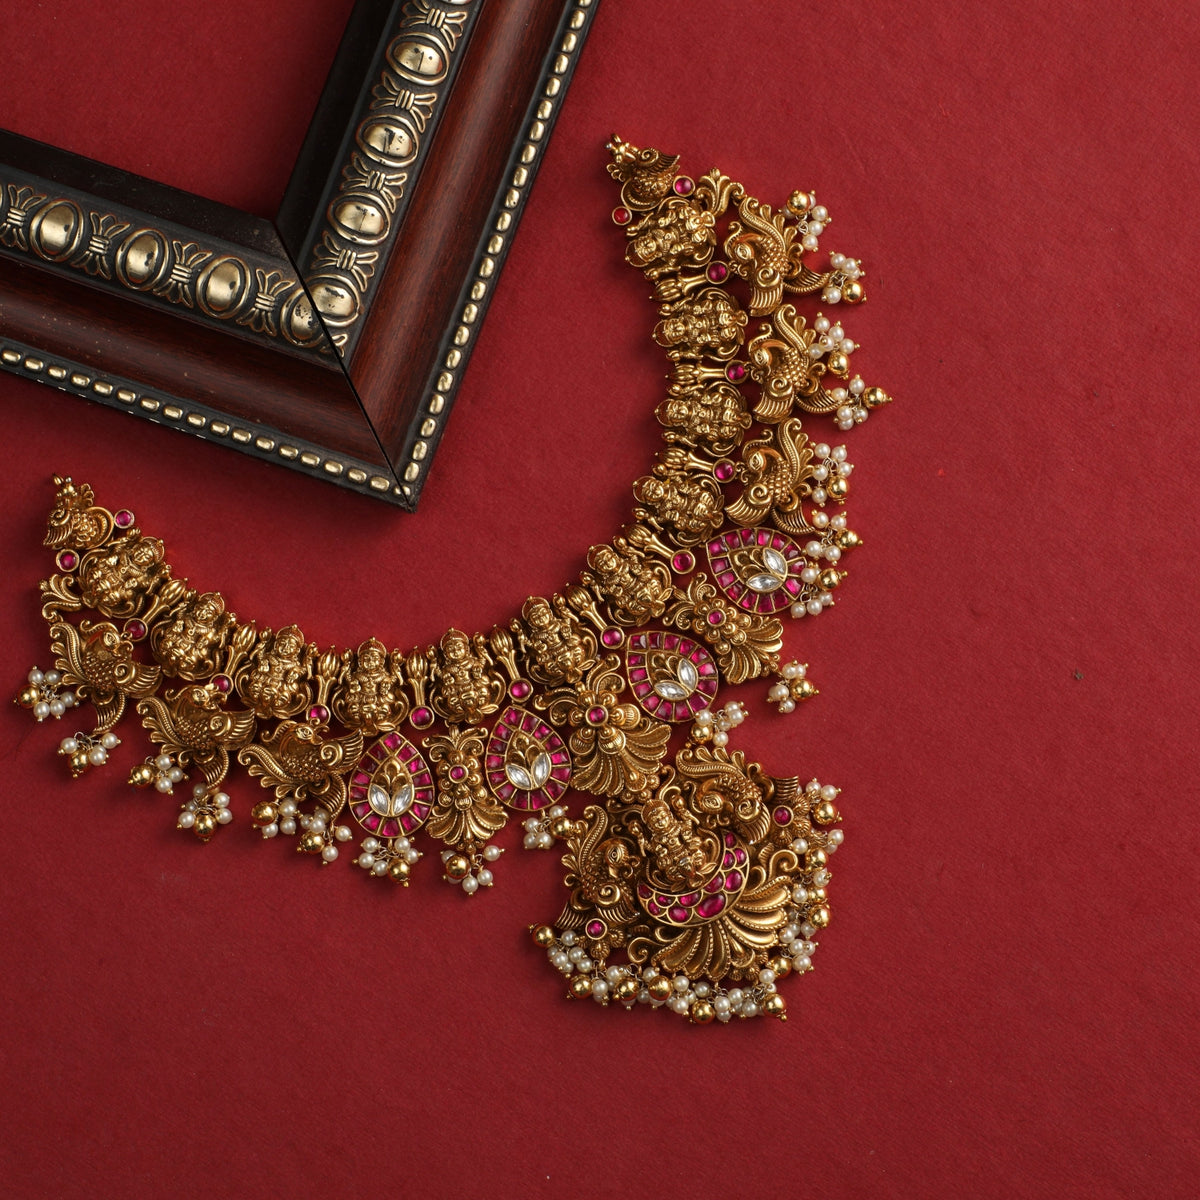 Chitra Temple Antique Necklace